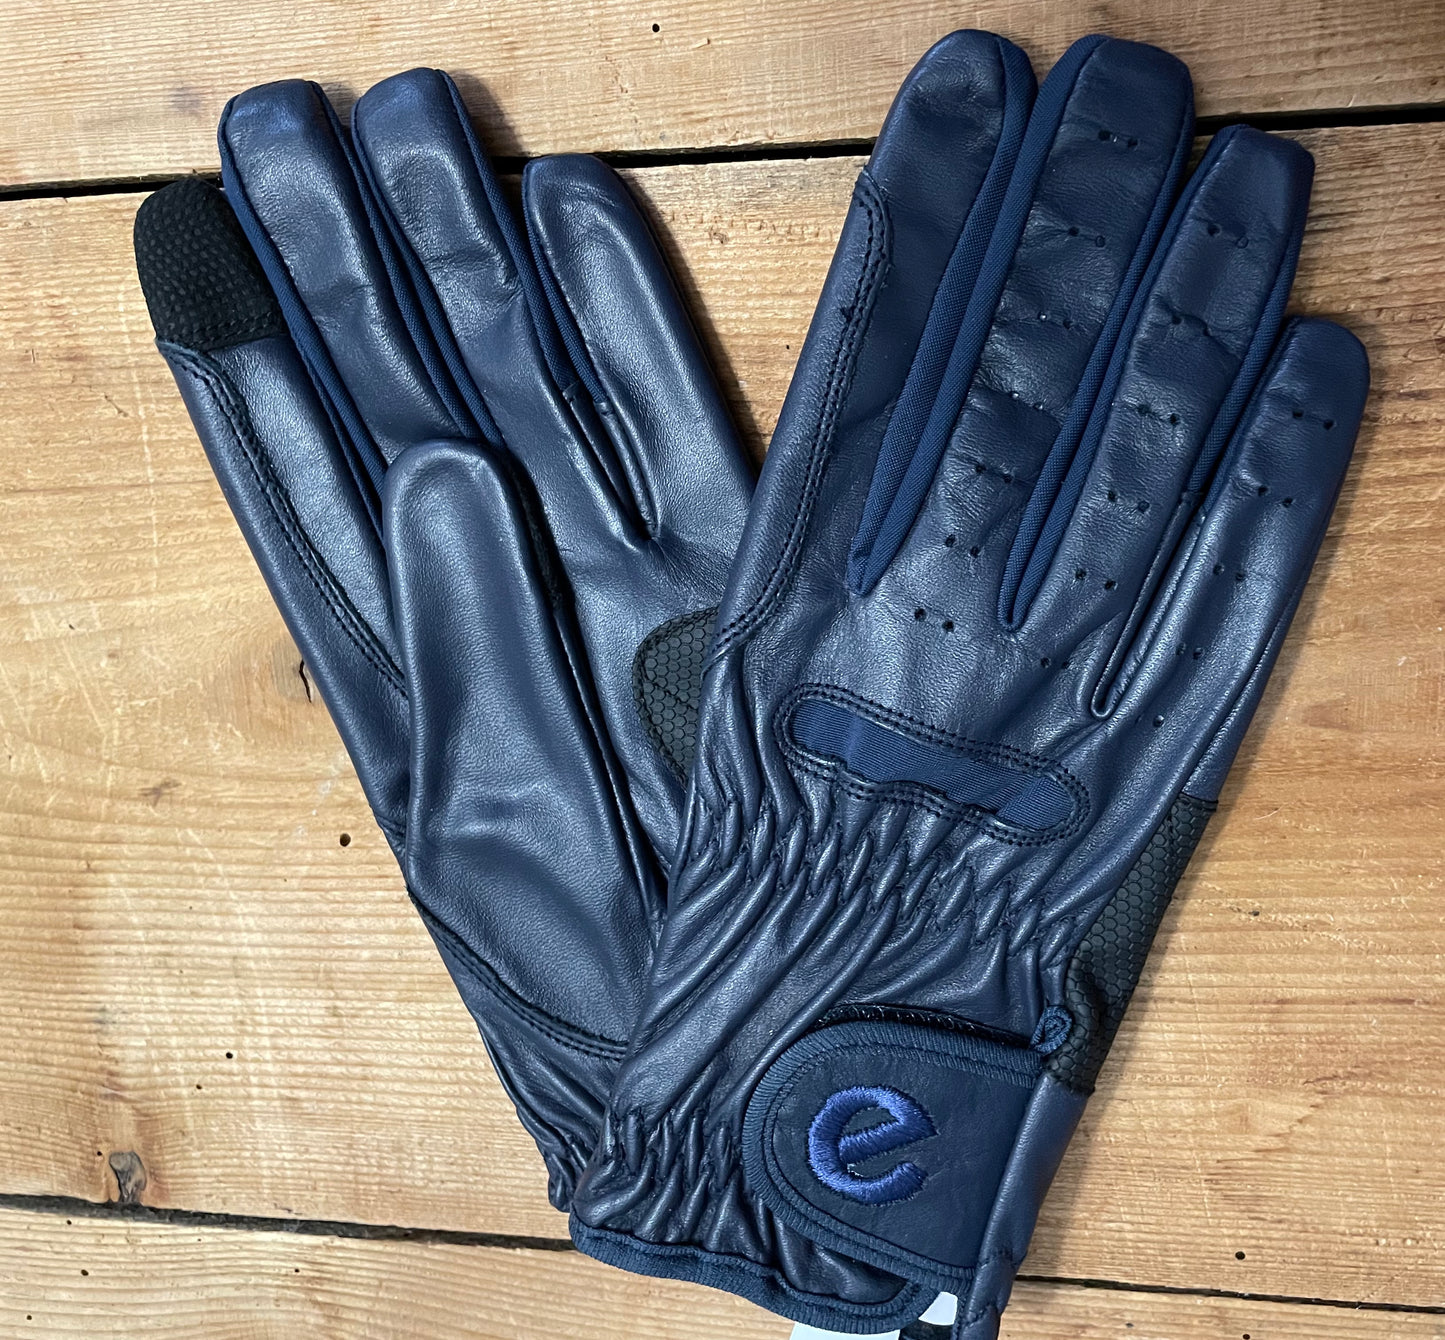 Gloves - eQuest Grip Pro Leather - Navy Blue